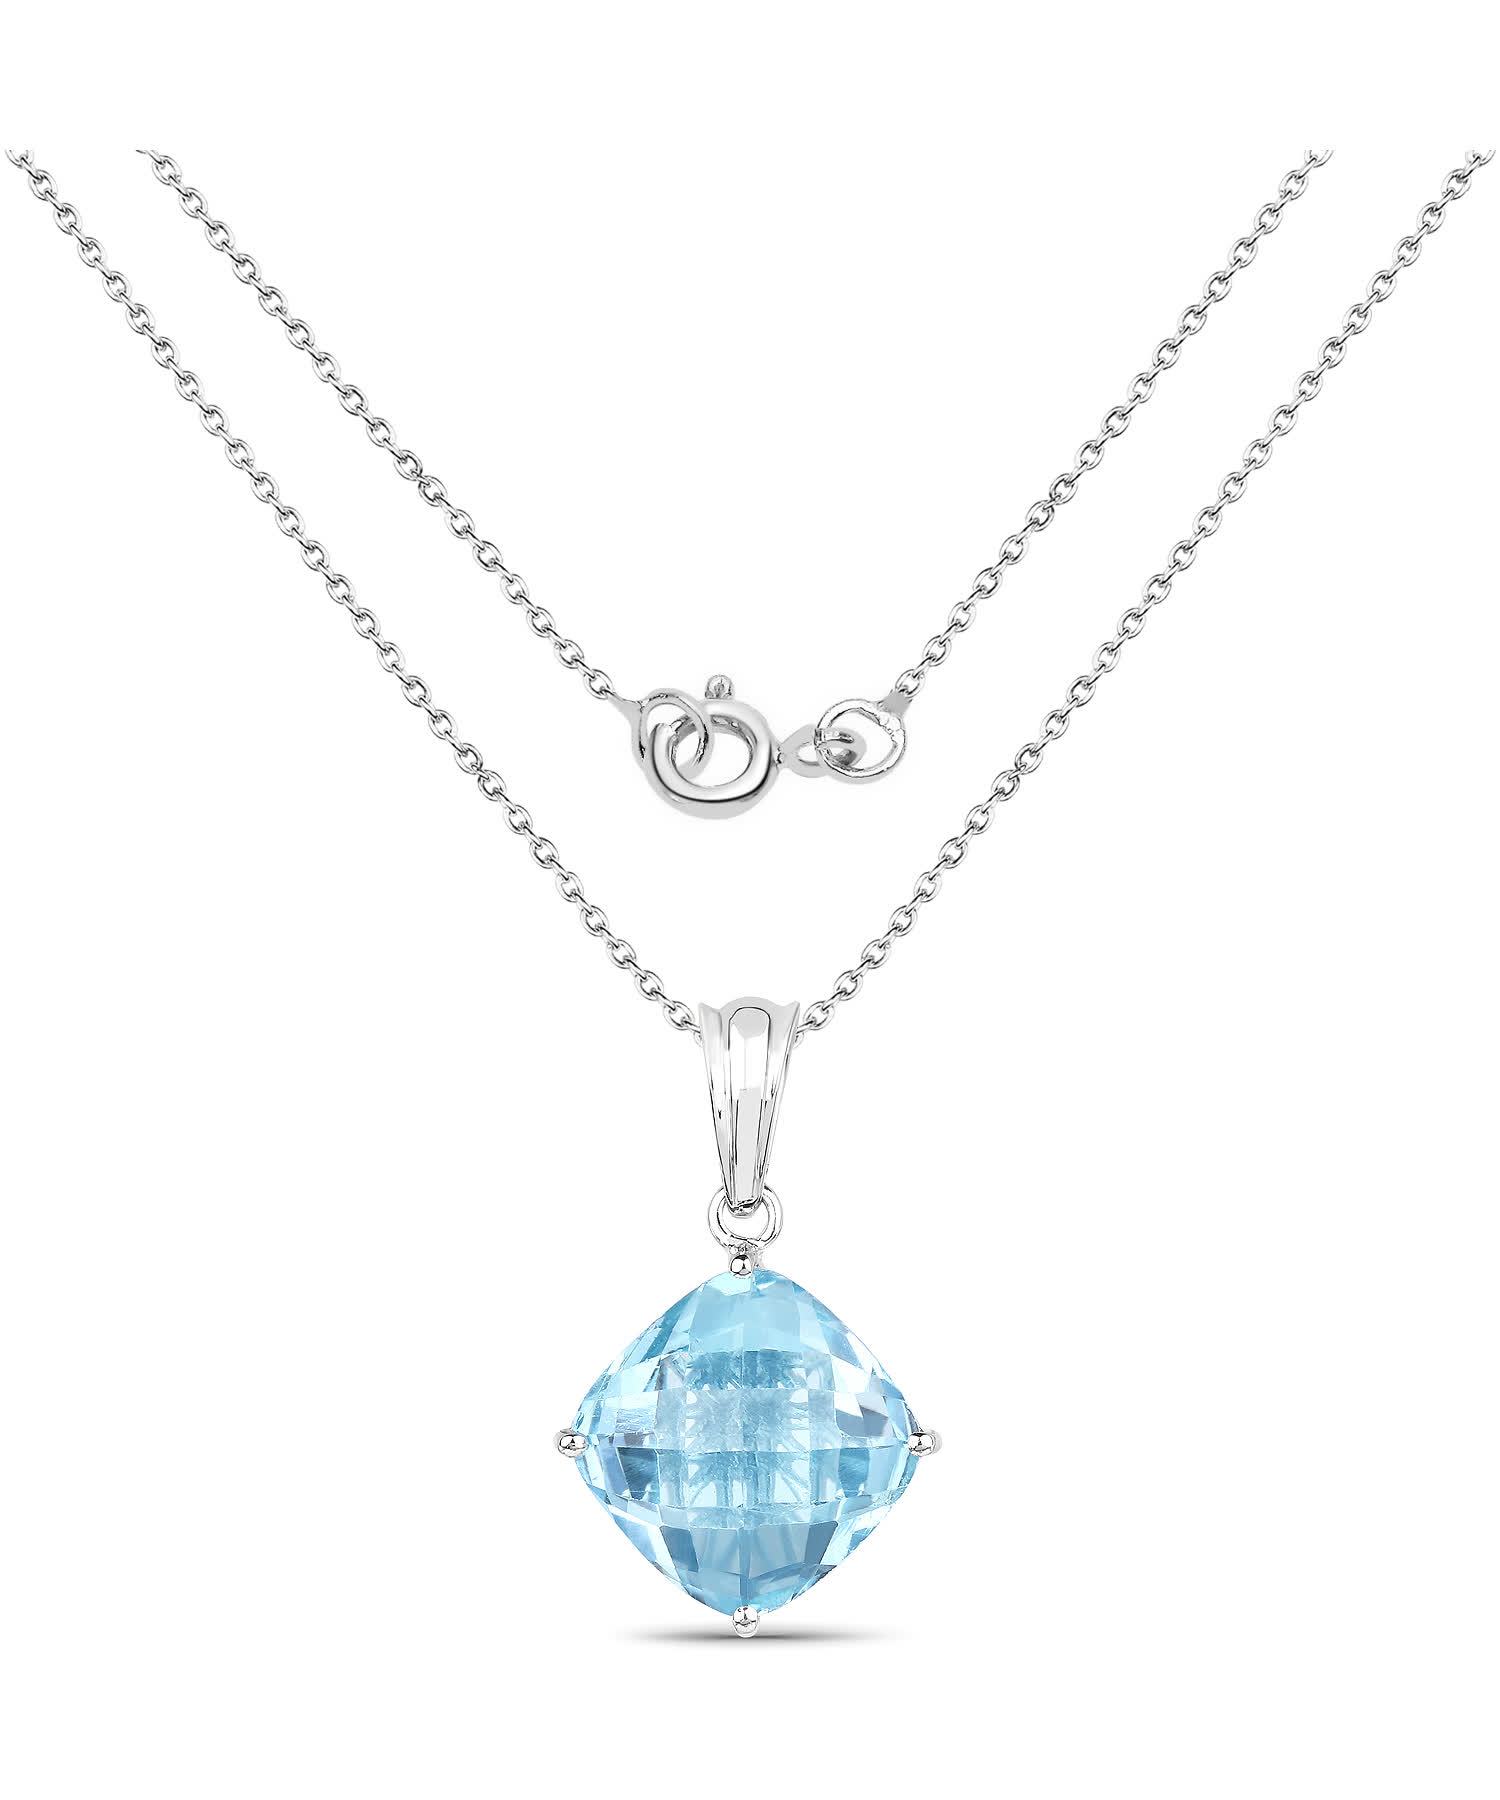 11.10ctw Natural Swiss Blue Topaz Rhodium Plated 925 Sterling Silver Pendant With Chain View 2